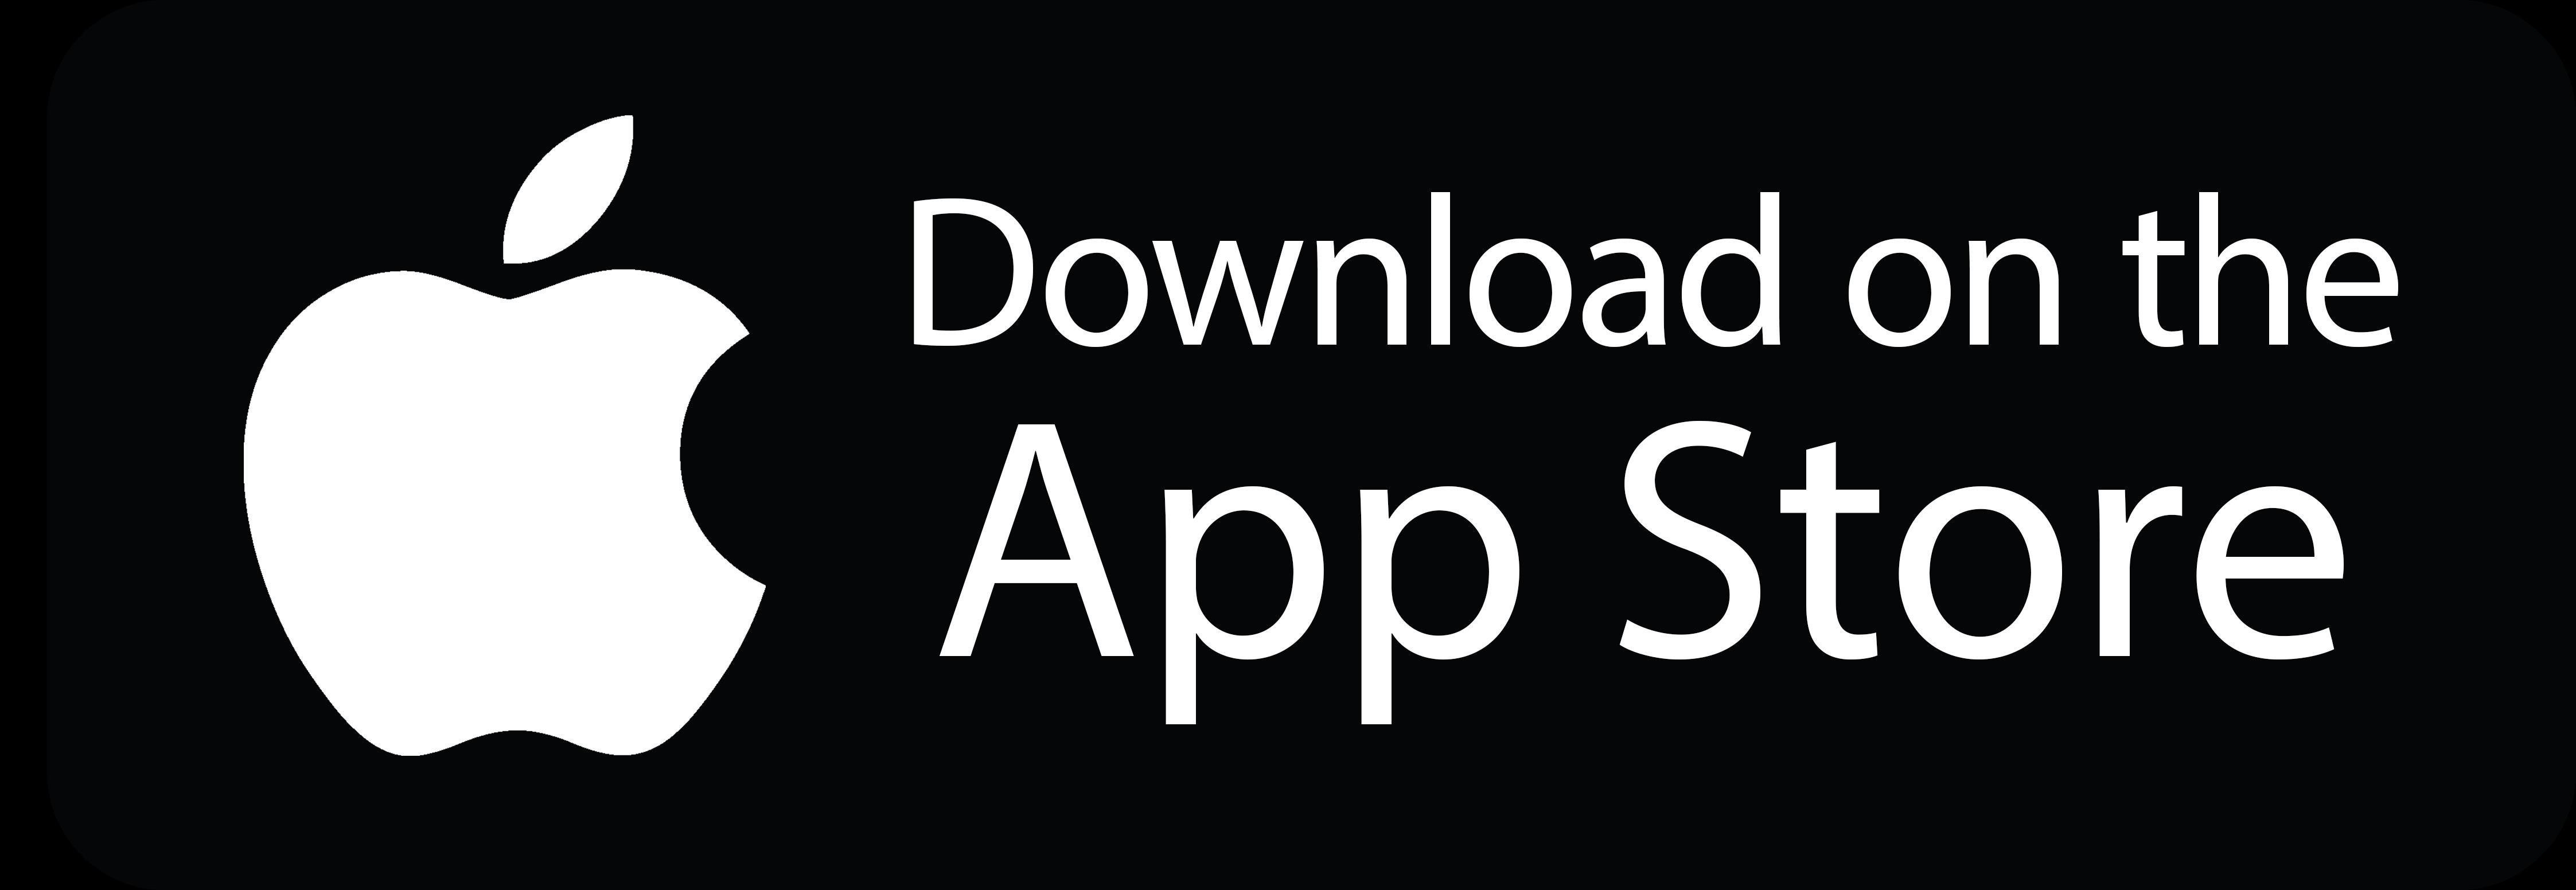 Find Free Trail Apps in Apple Store Conveniently Now!